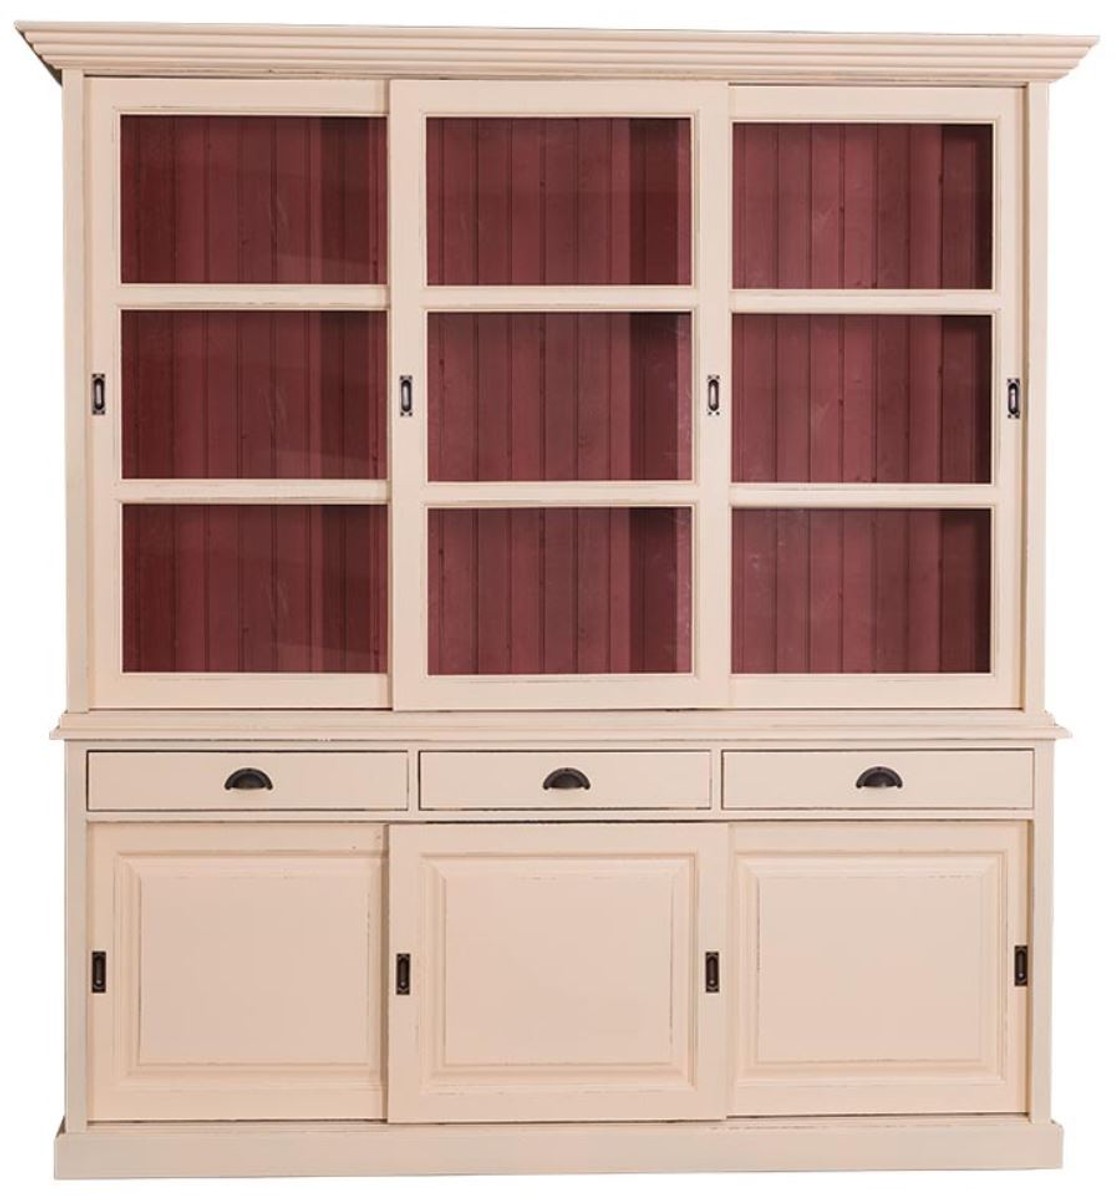 Casa Padrino Country Style Kitchen Cabinet Antique Cream Red 206